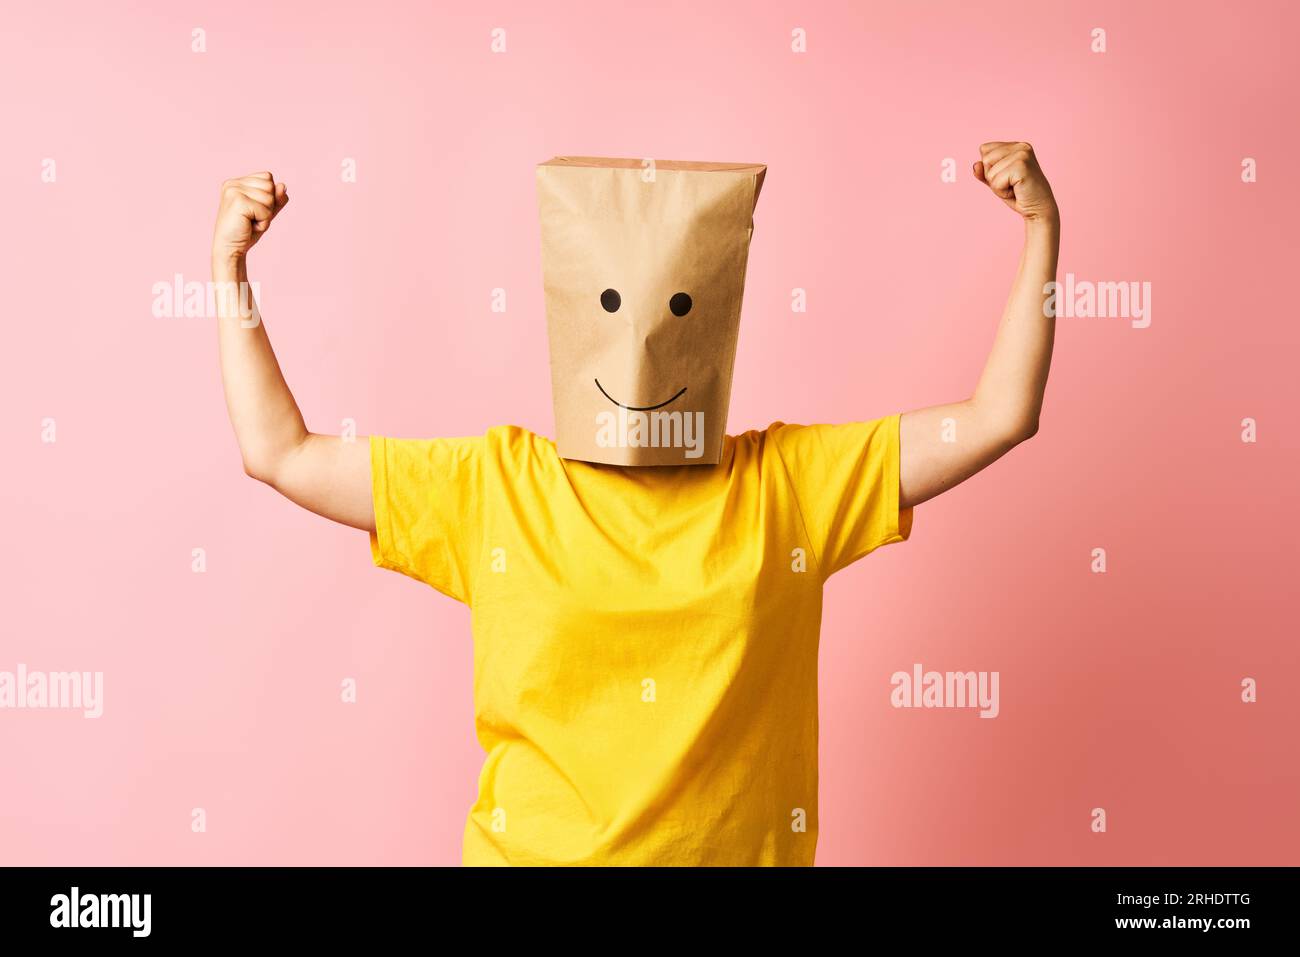 Happy woman with paper bag over head show biceps muscles proud of achievements and personal success. Girl power concept Stock Photo